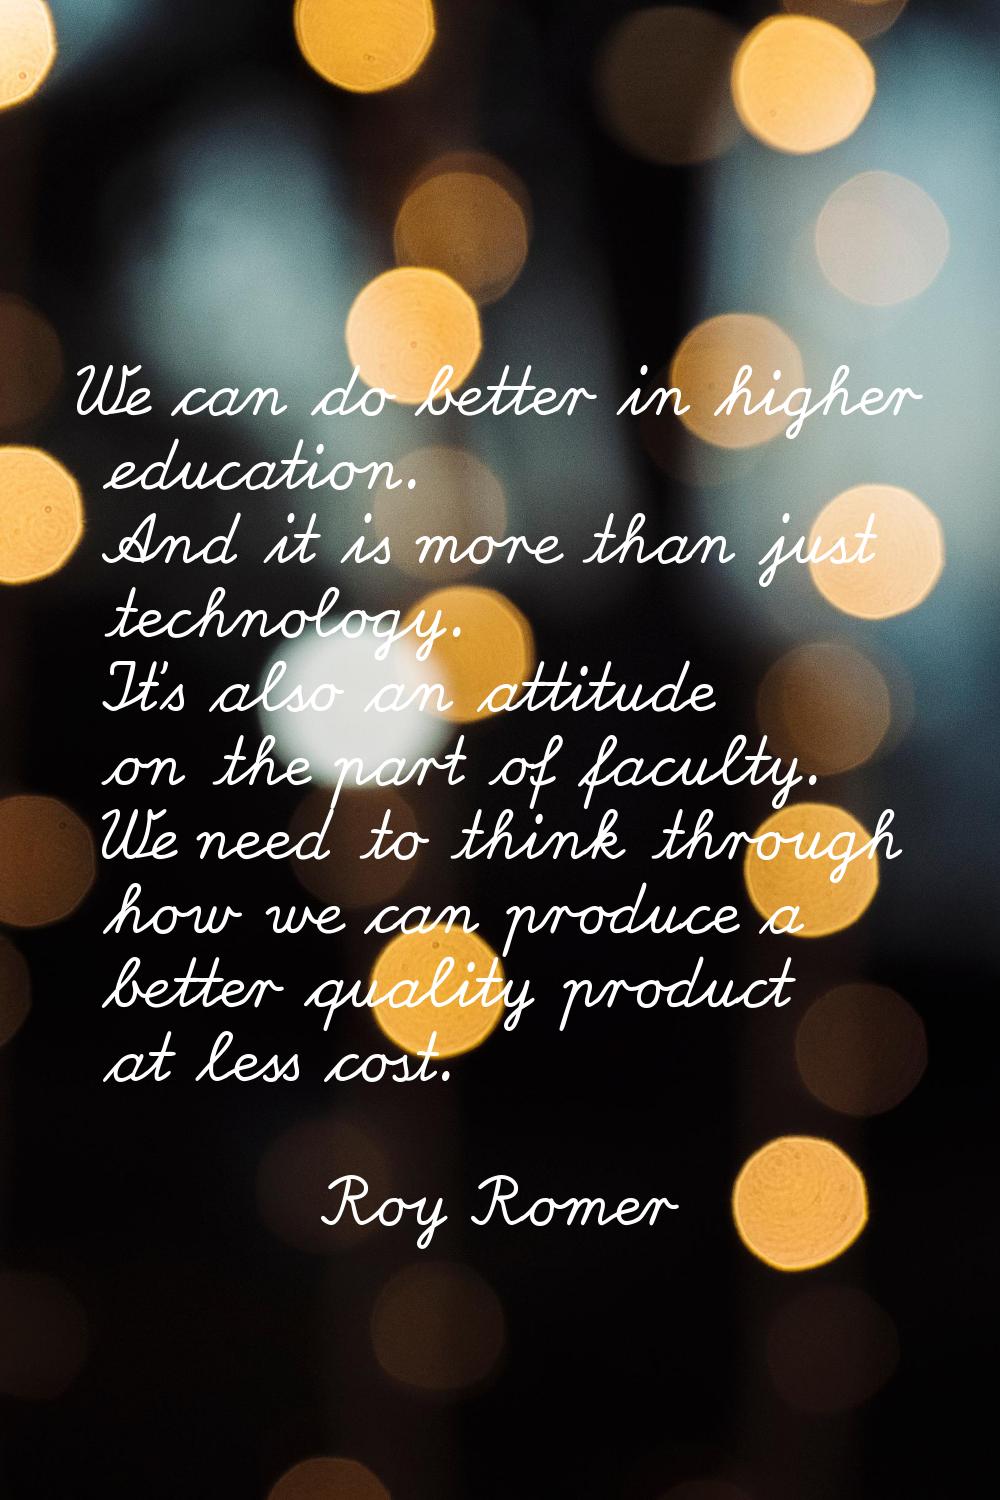 We can do better in higher education. And it is more than just technology. It's also an attitude on